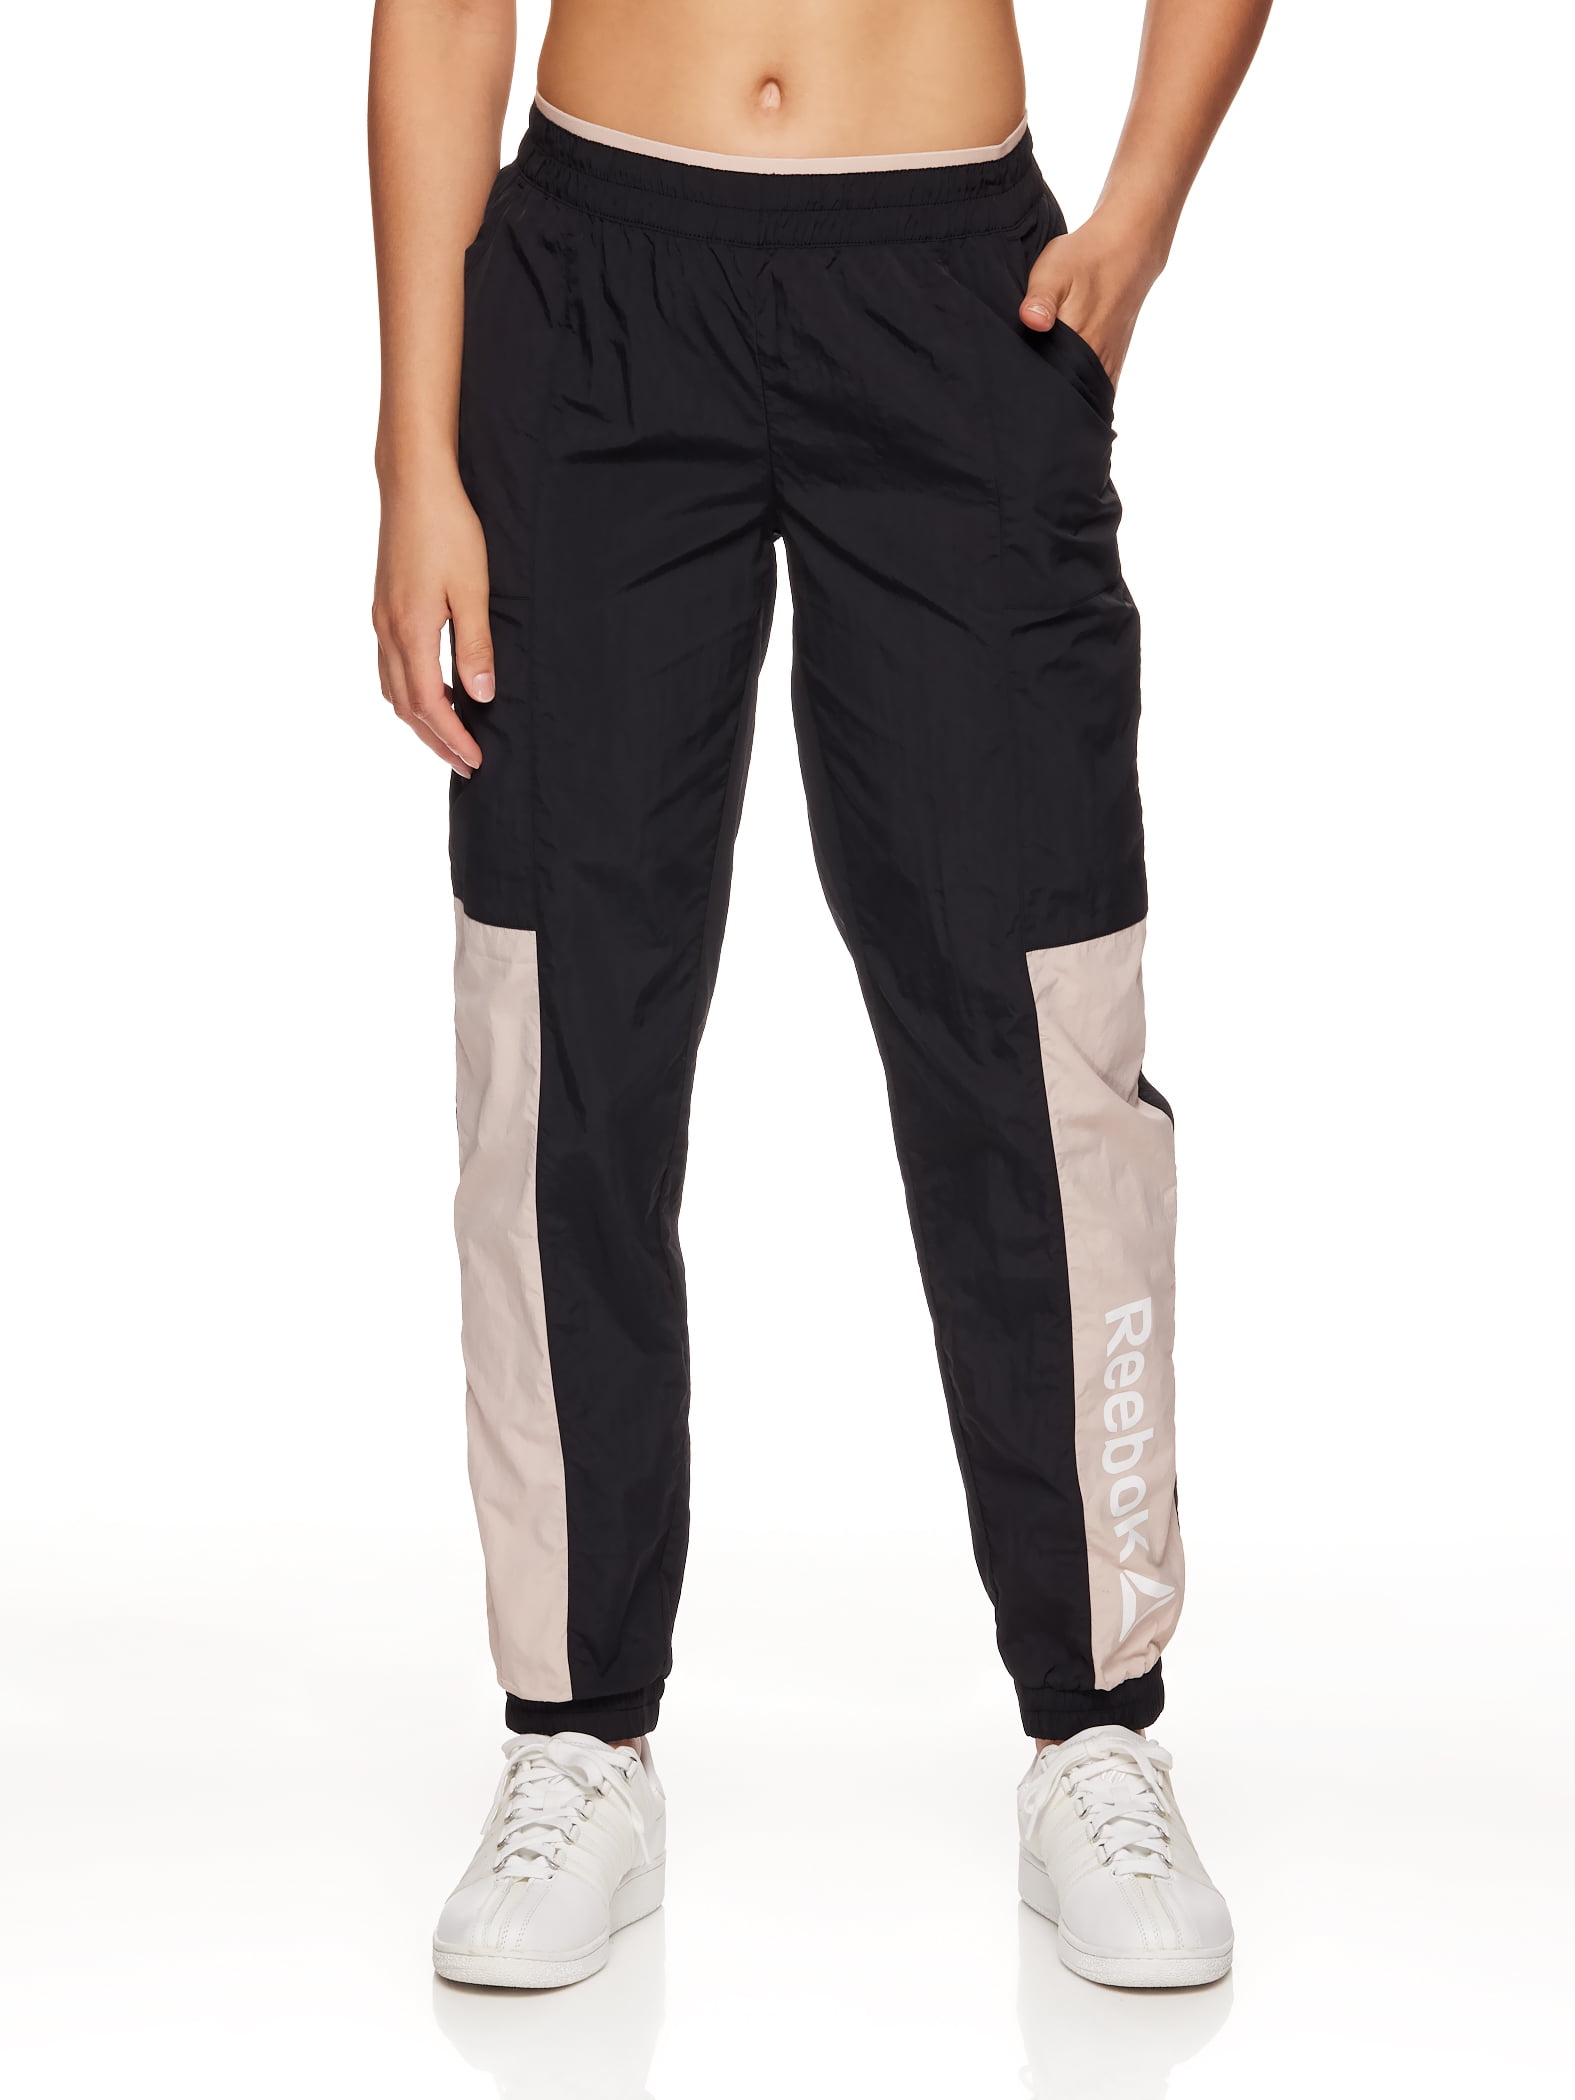 Reebok Women's Focus Track Woven Pants with Front Pockets and Back Zipper  Pocket